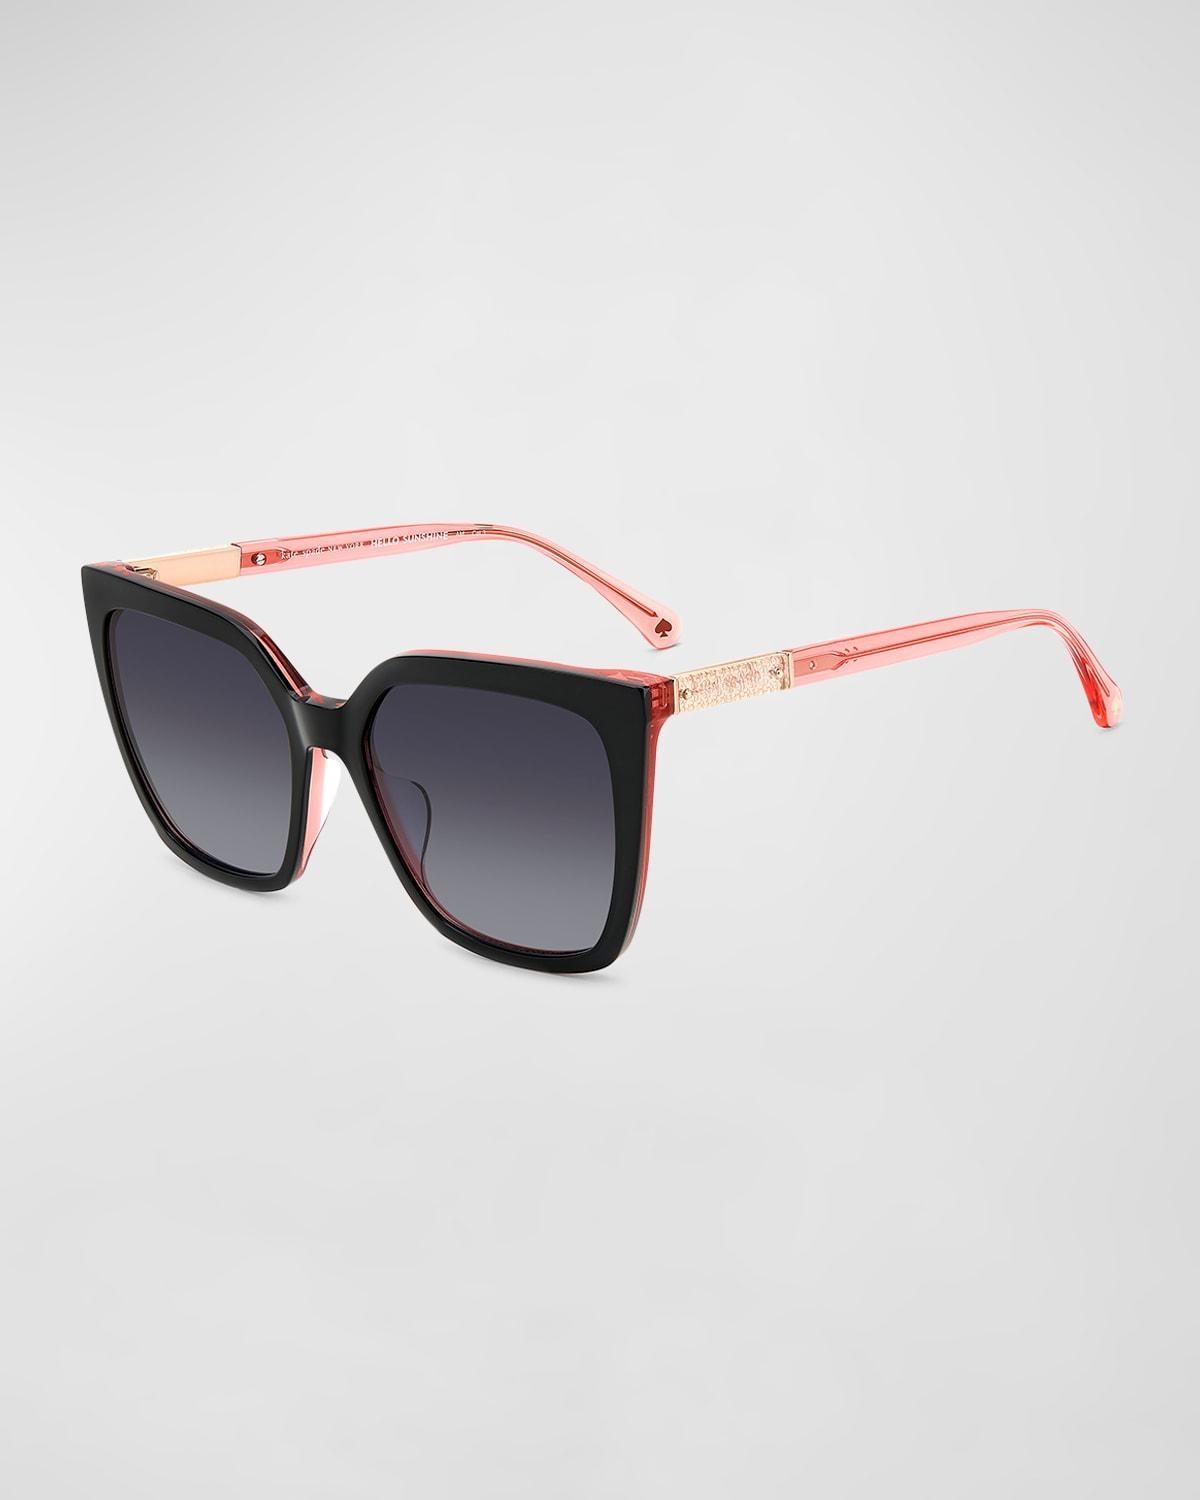 kate spade new york marlowe 55mm gradient square sunglasses Product Image